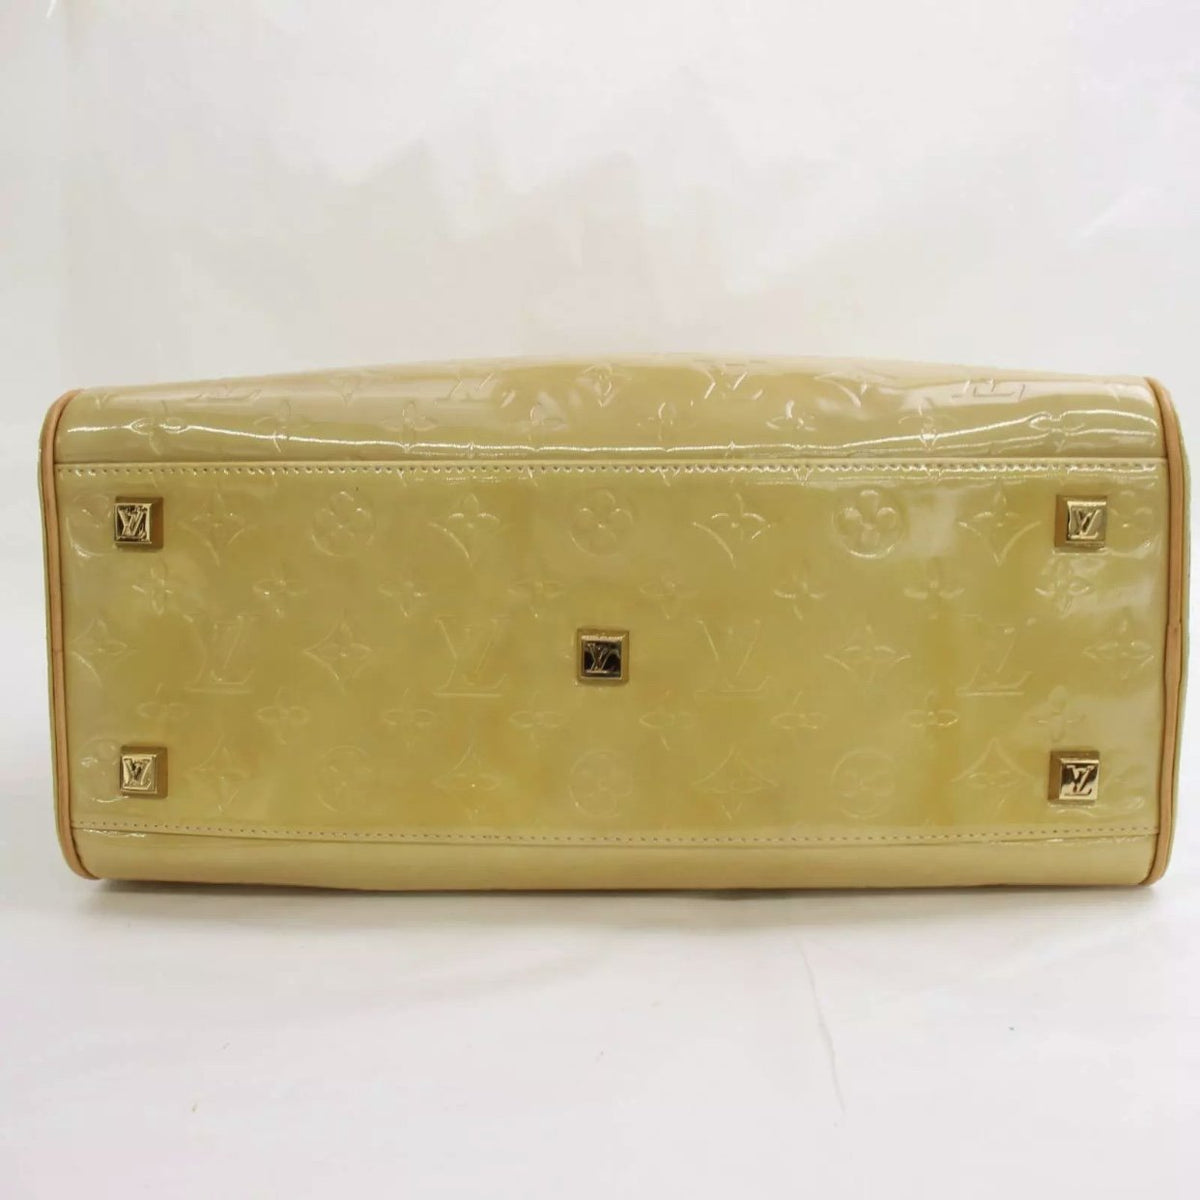 Tompkins square patent leather handbag Louis Vuitton Gold in Patent leather  - 17168775